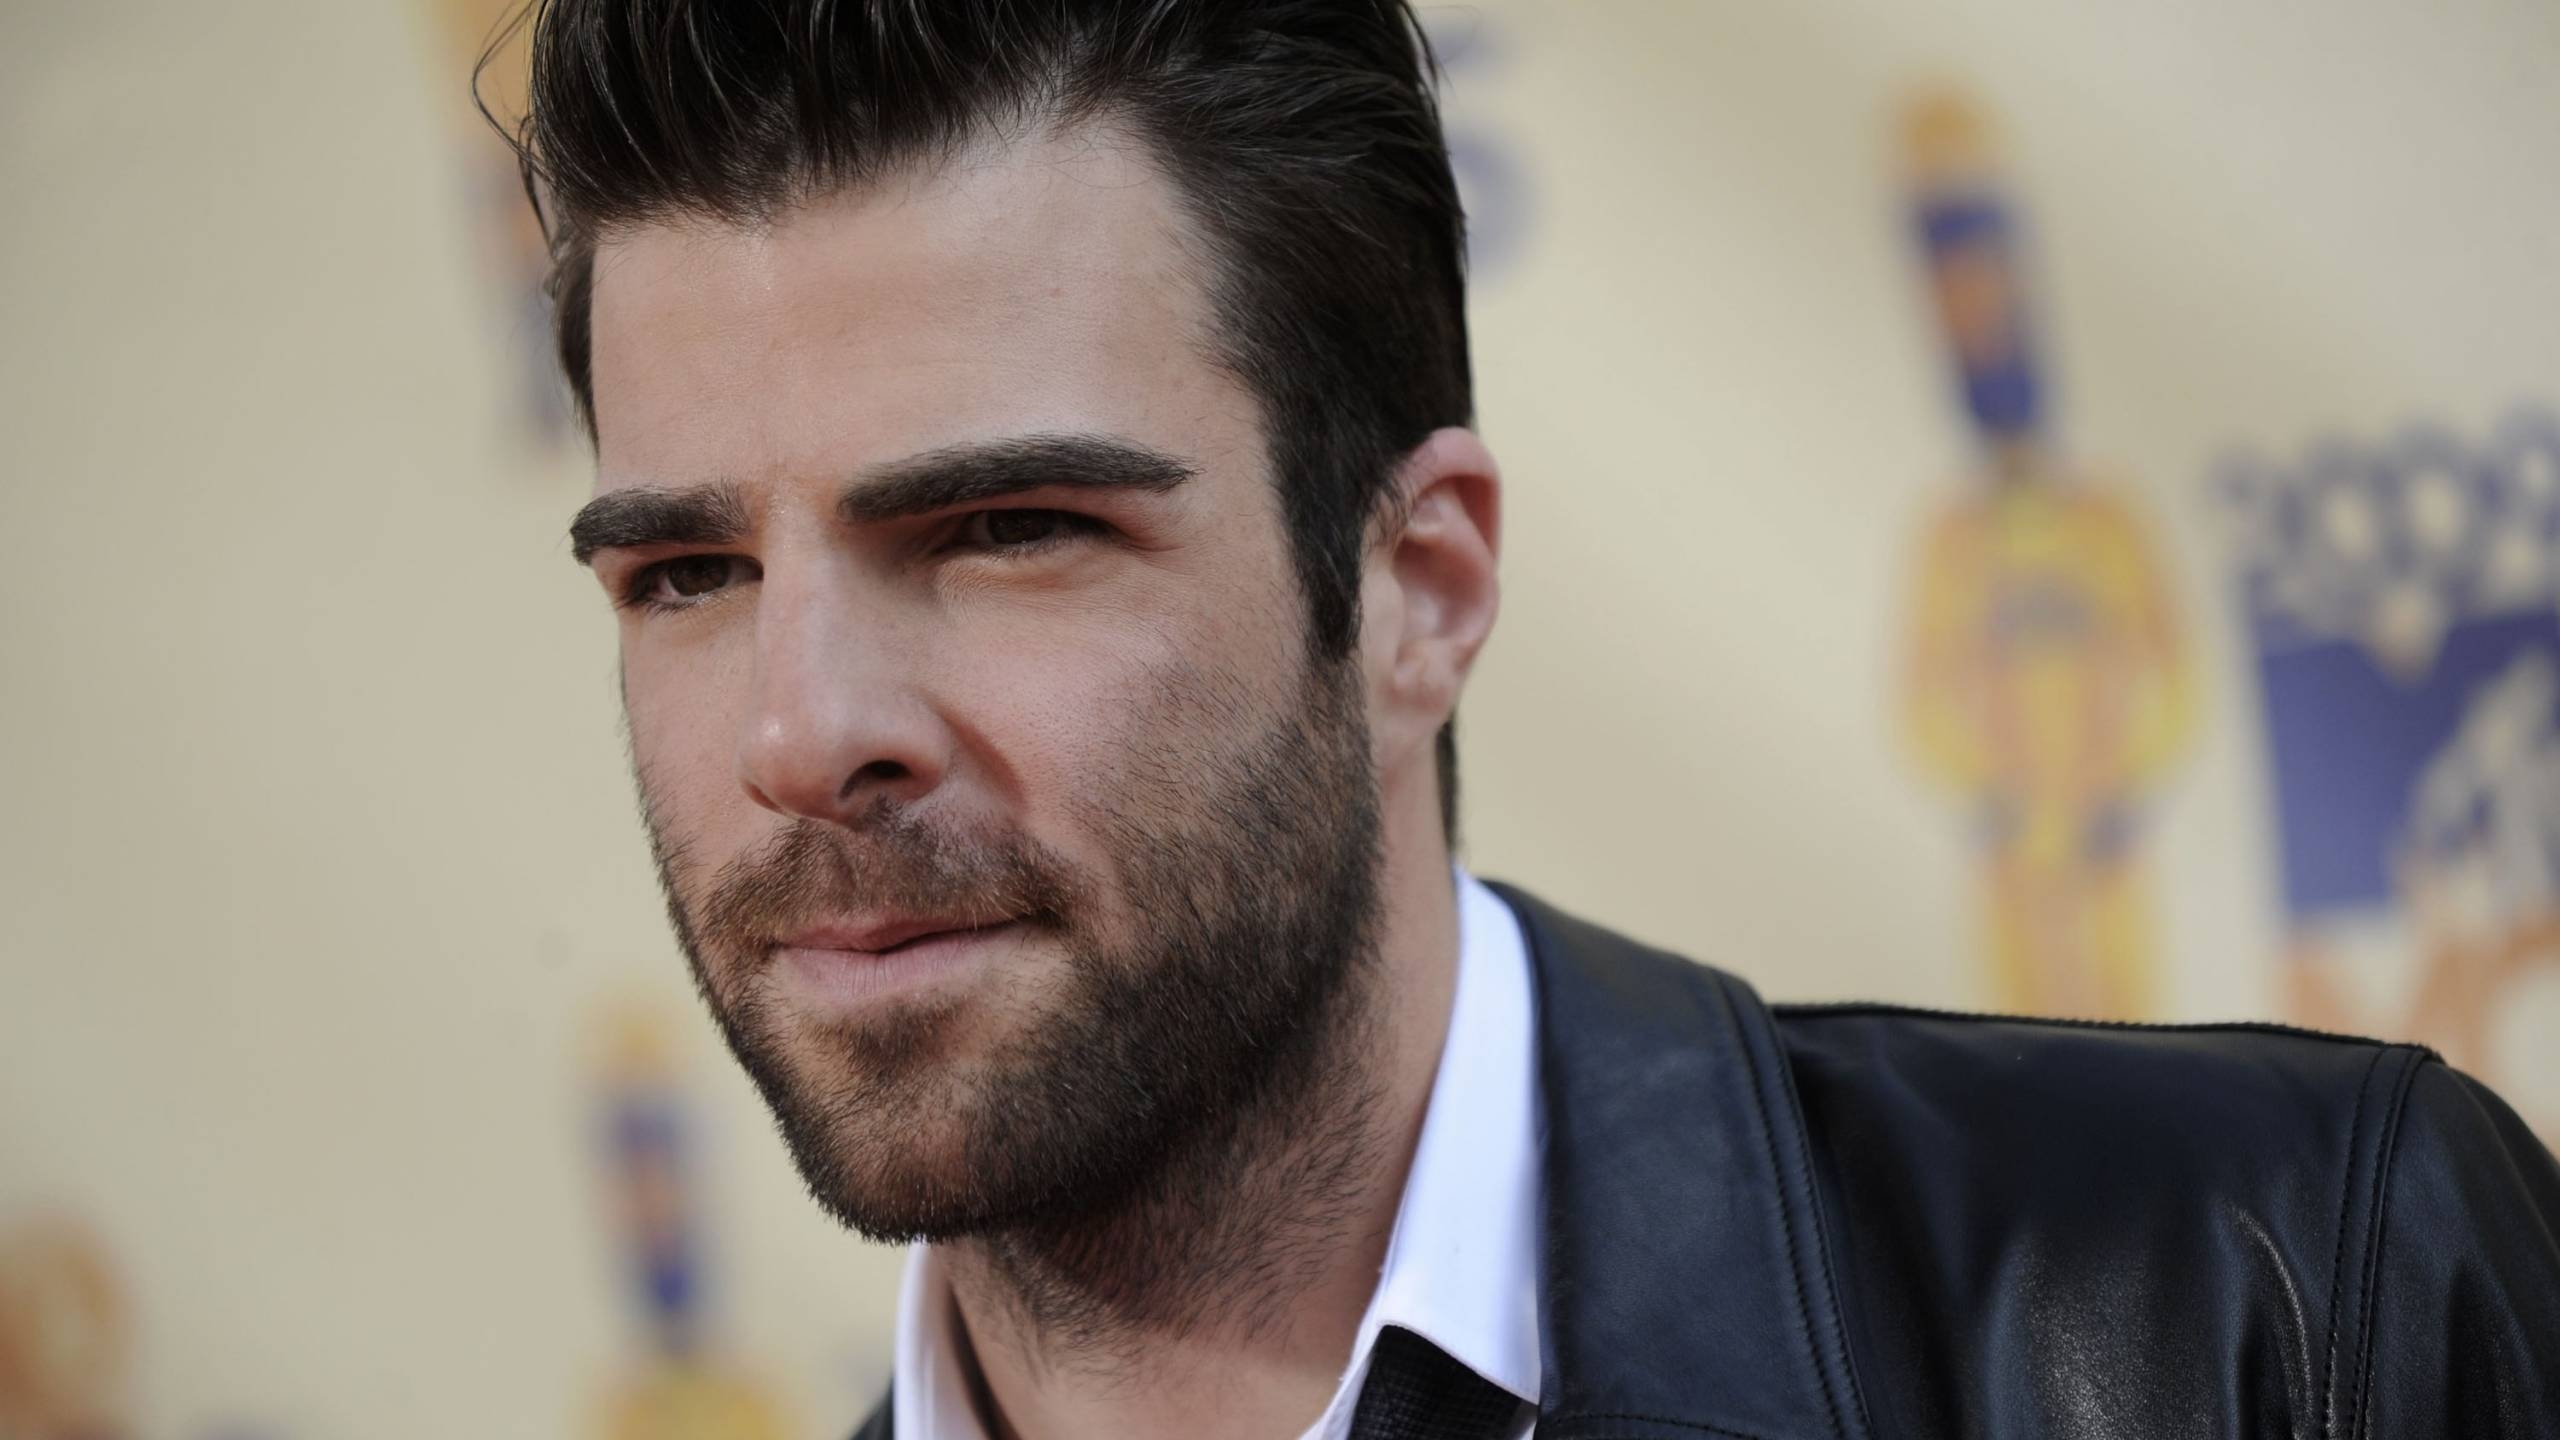 Zachary Quinto Actor for 2560x1440 HDTV resolution